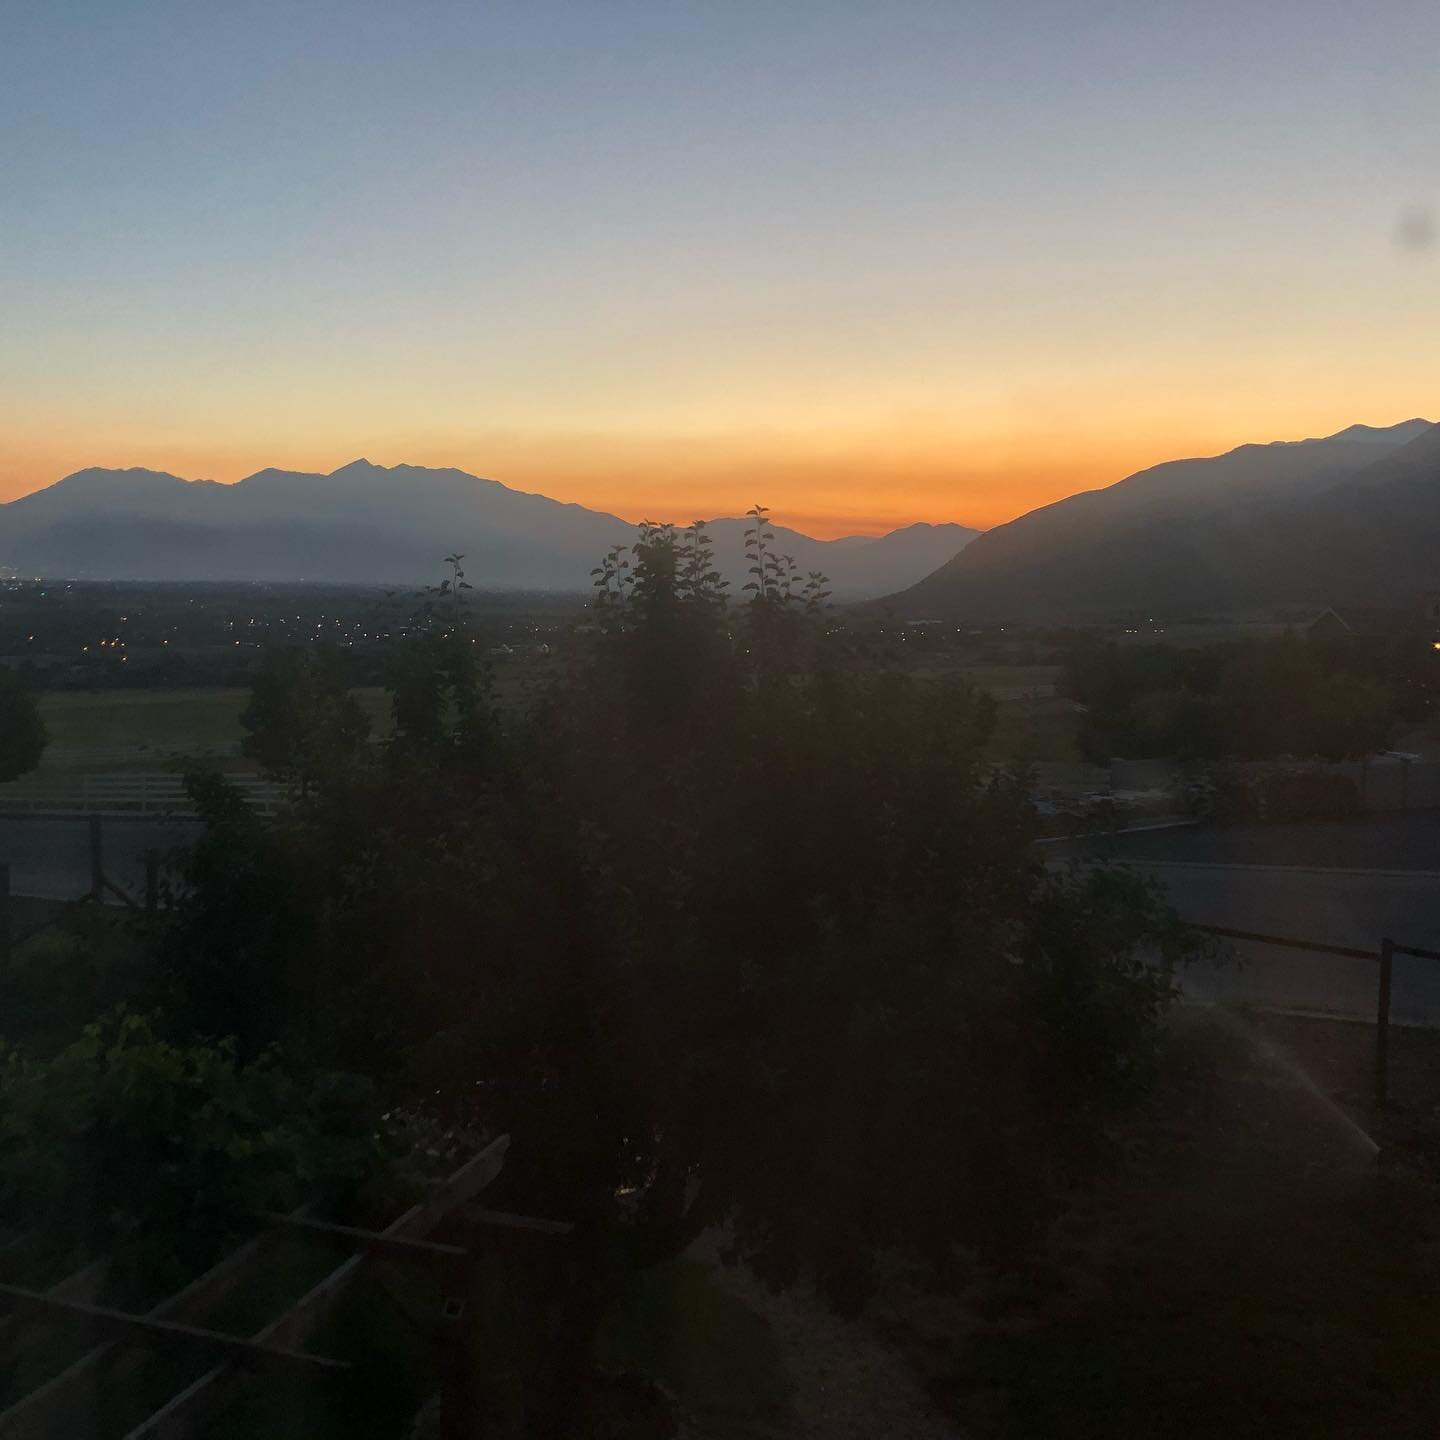 Utah...it&rsquo;s hard NOT to fall in love with this place. We were awakened at 5:30 this morning with this amazing sunrise...right outside our bedroom window!